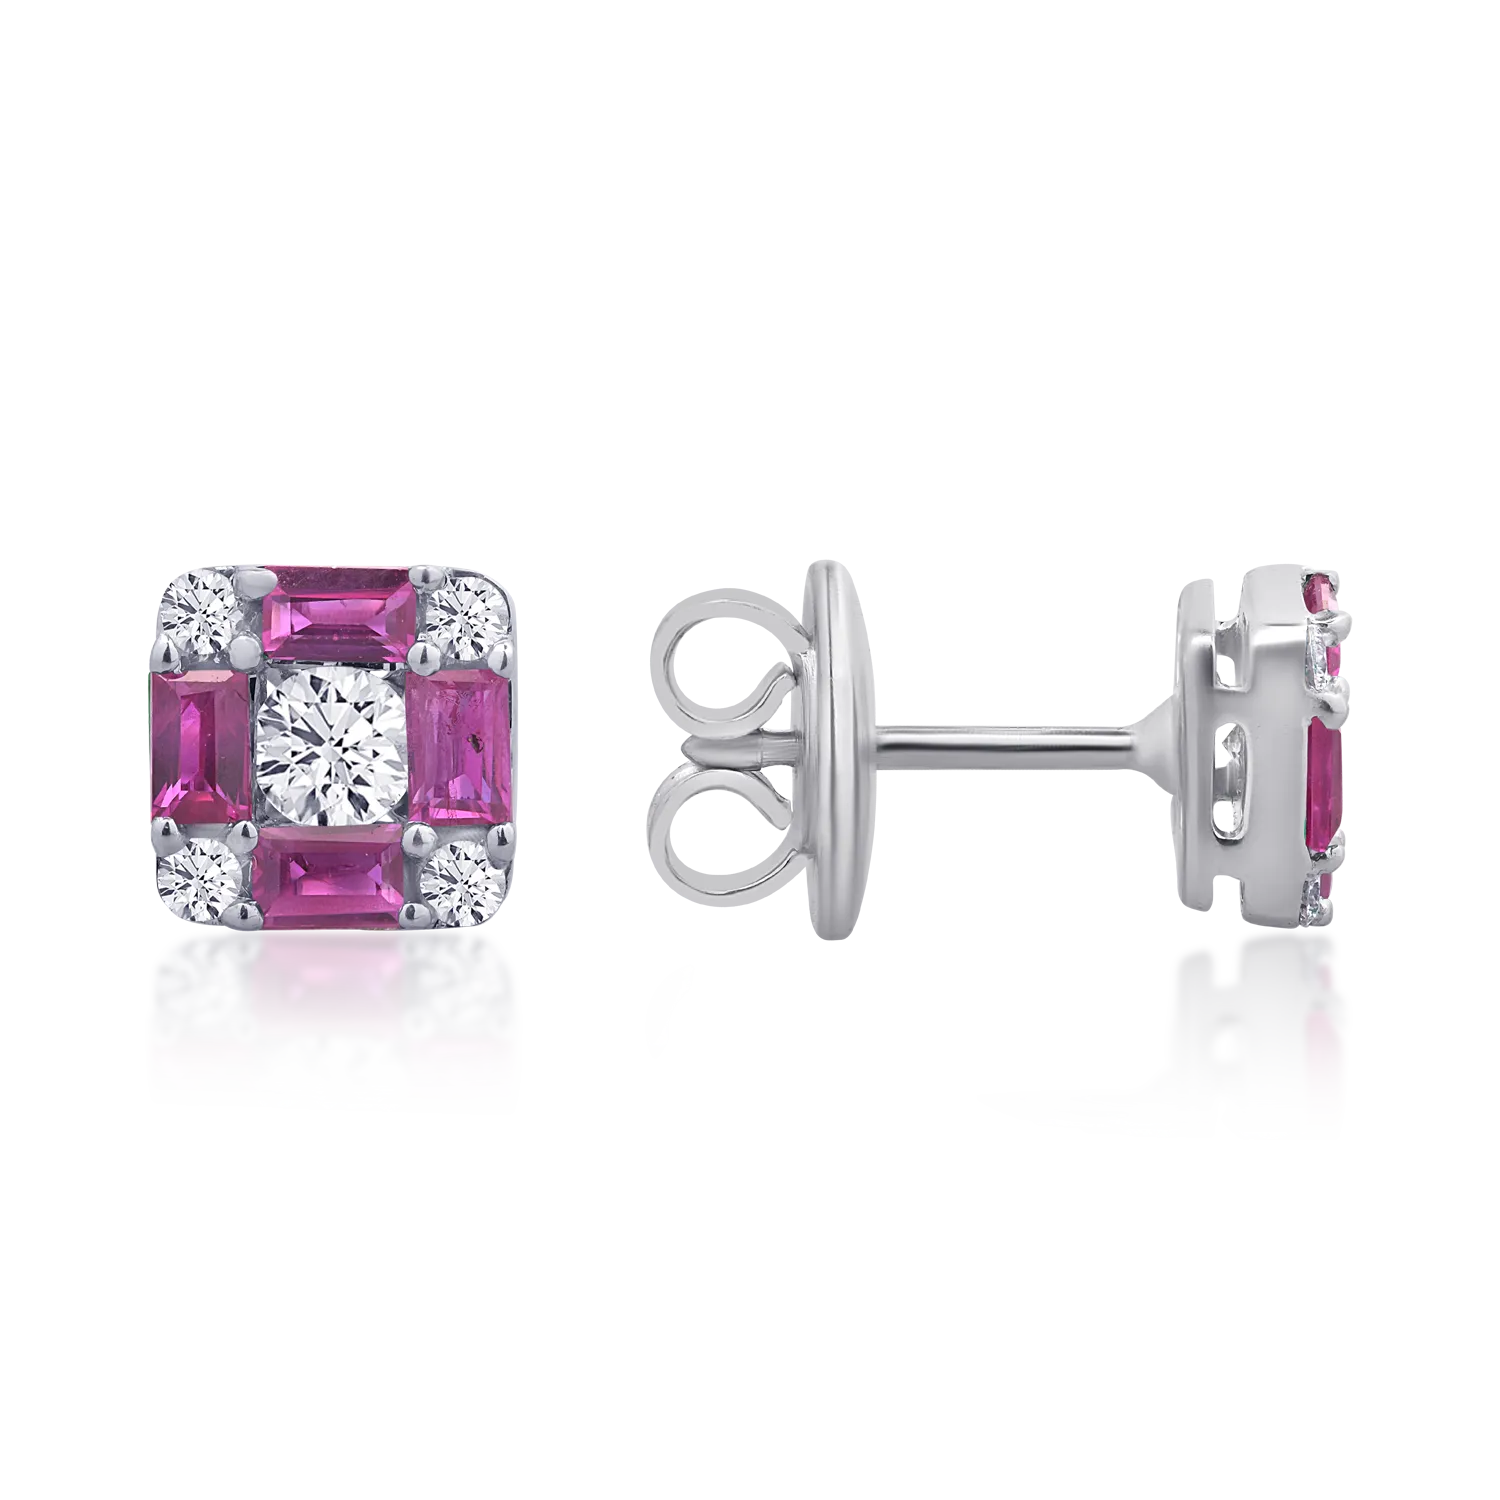 18K white gold earrings with 0.94ct rubies and 0.38ct diamonds